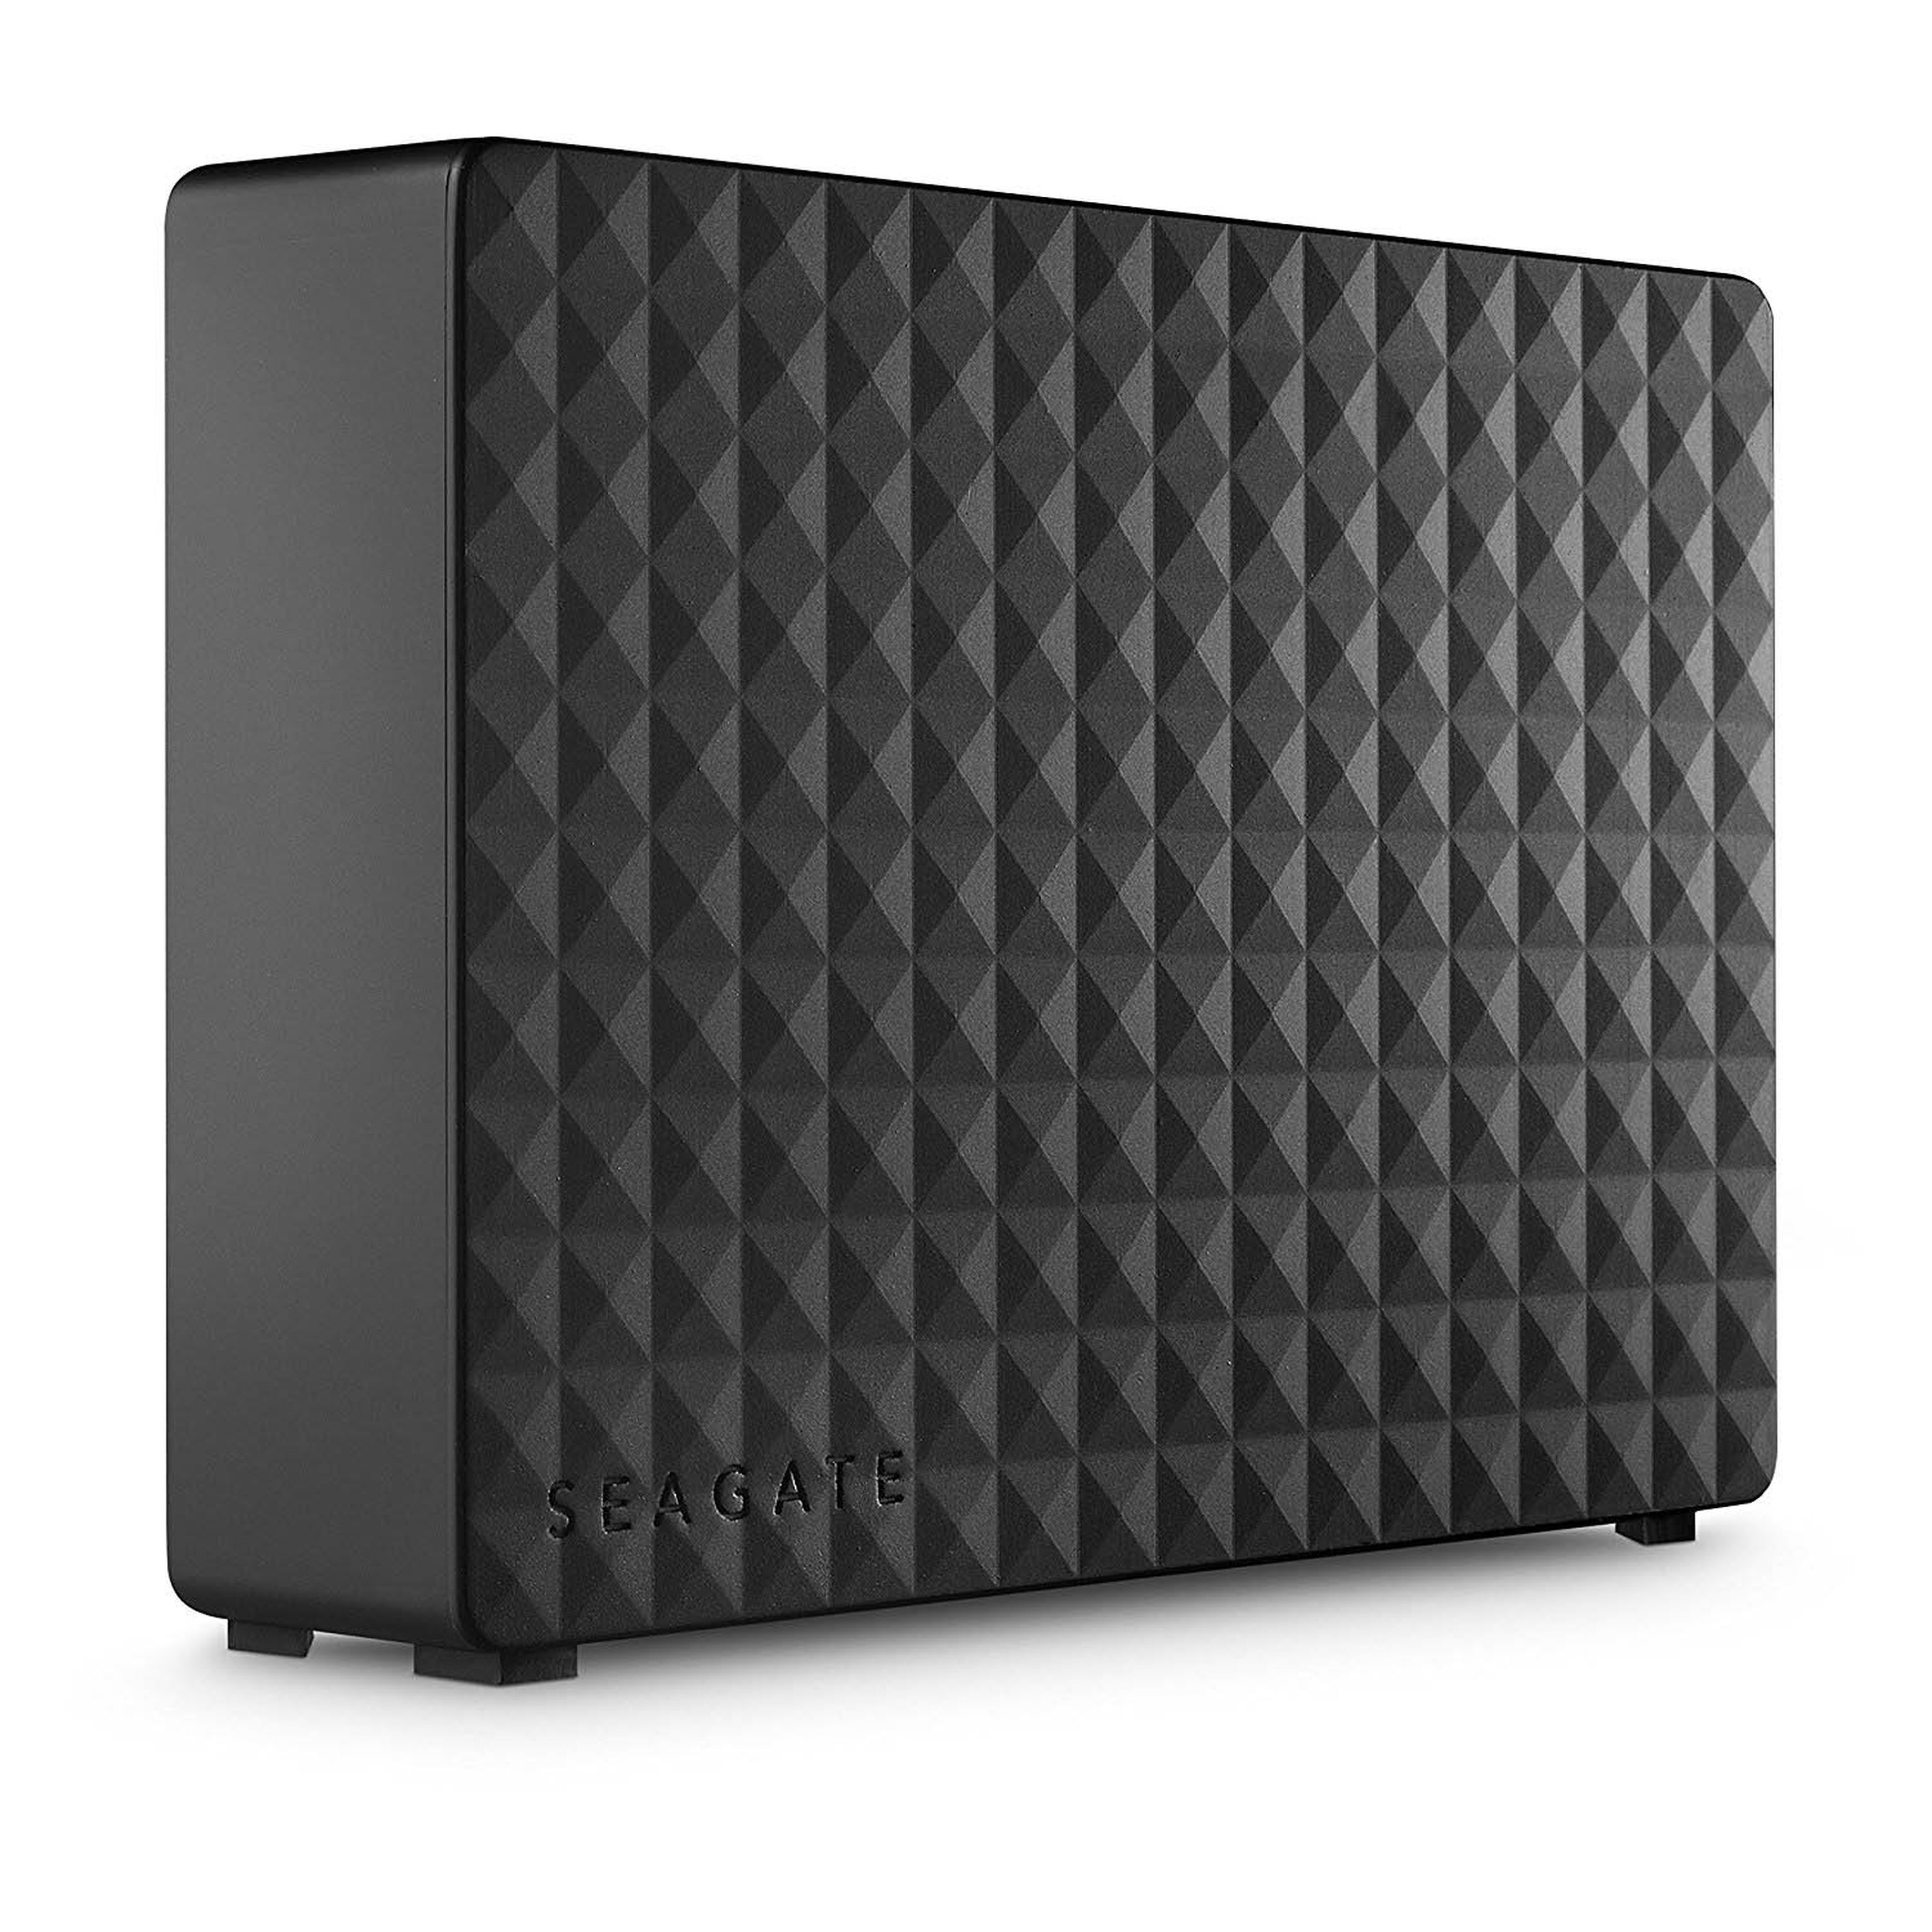 Seagate Expansion 6 TB